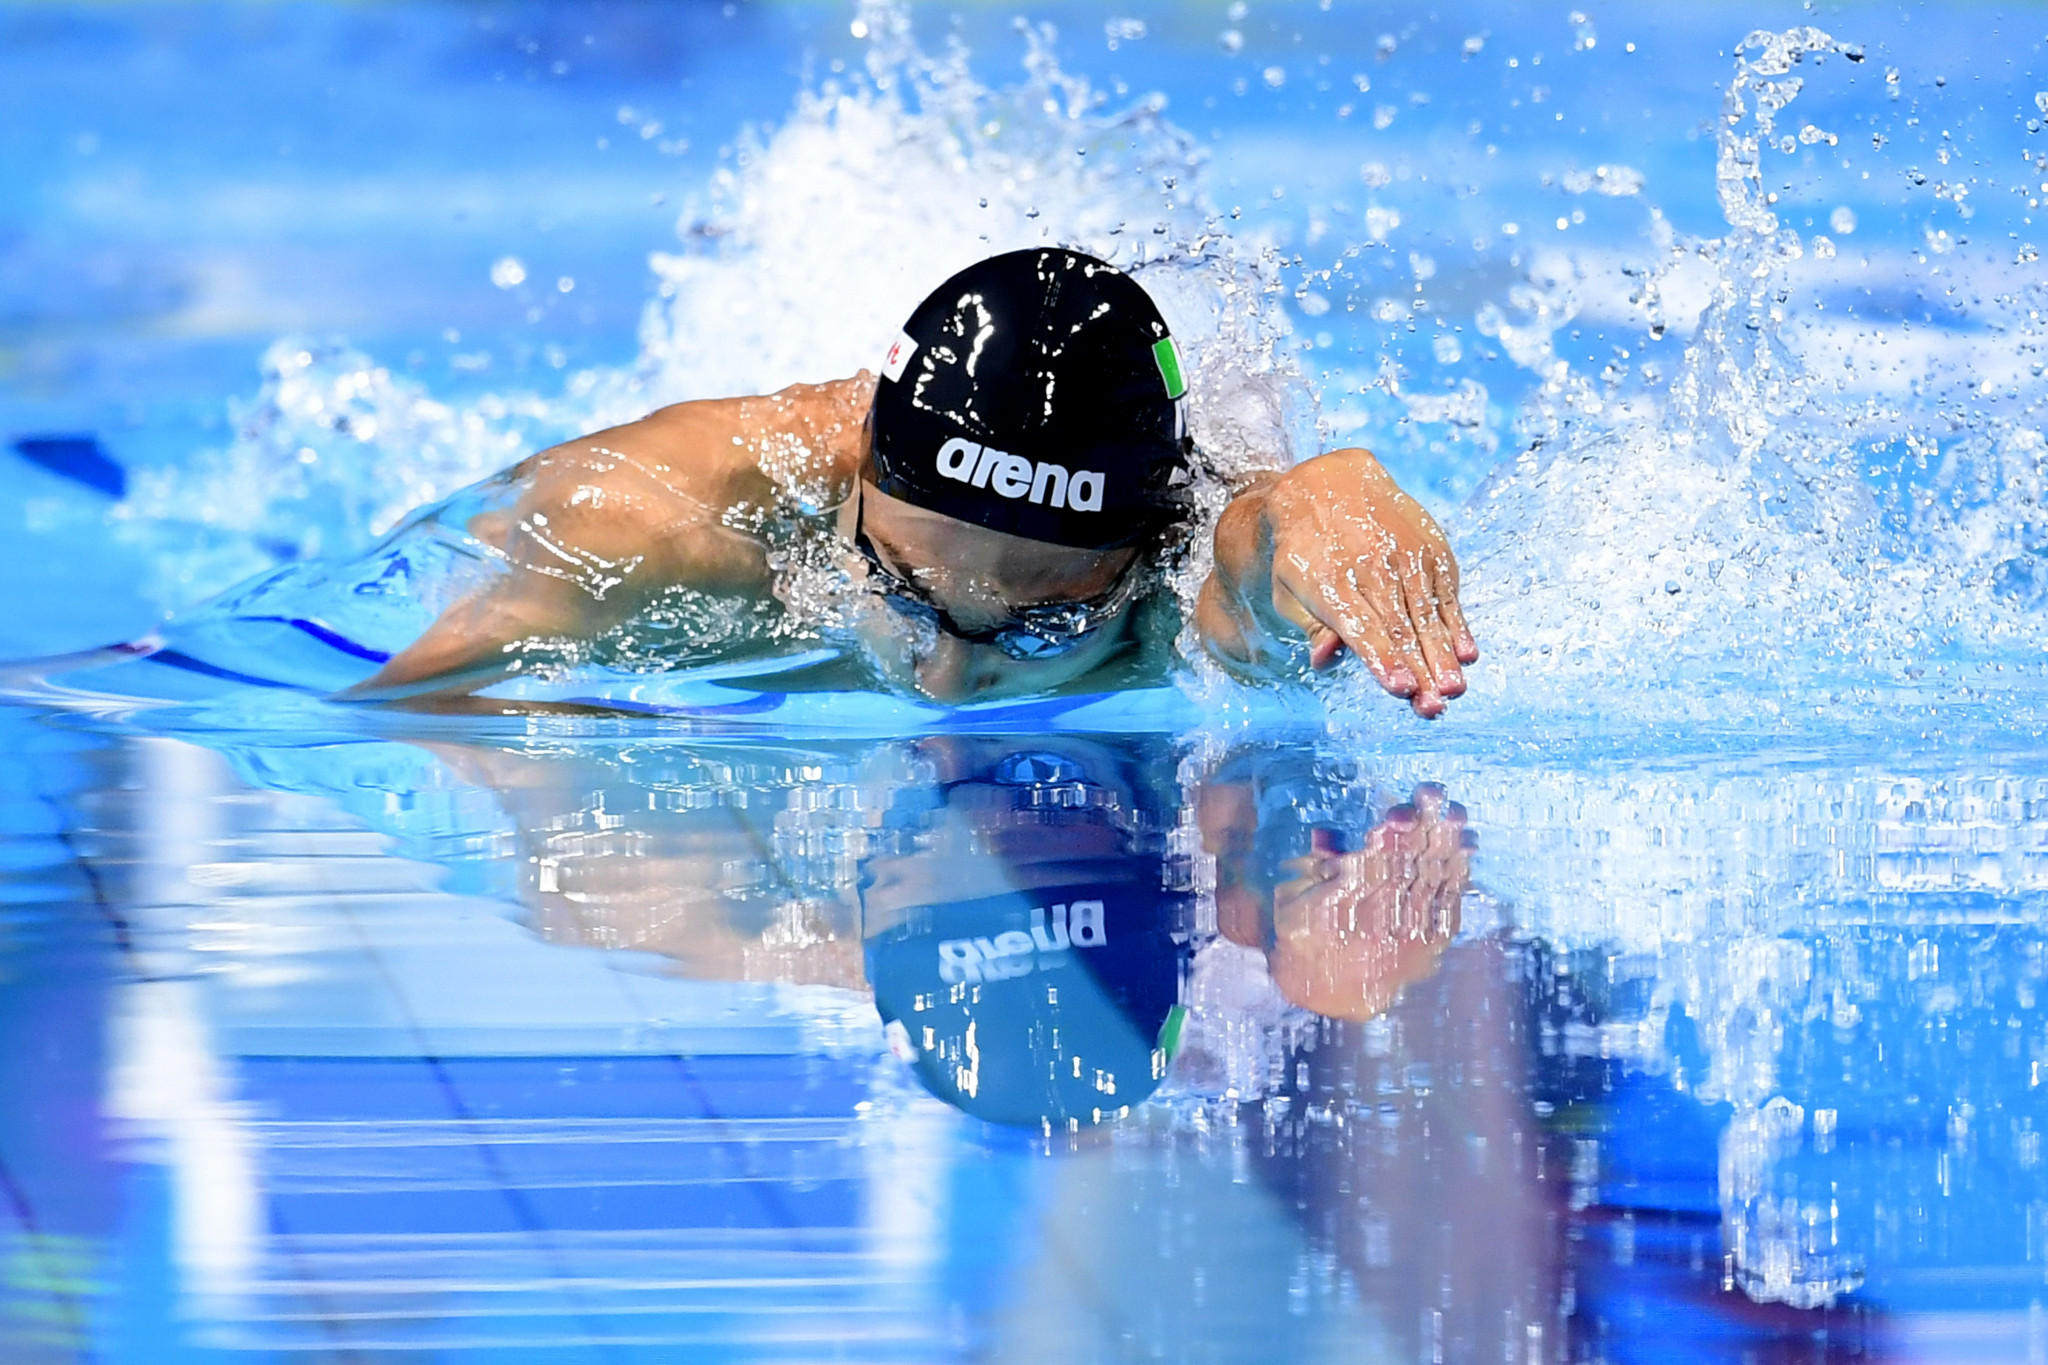 Filippo Megli won a thrilling race in the men's 100m freestyle to clinch gold ©Getty Images